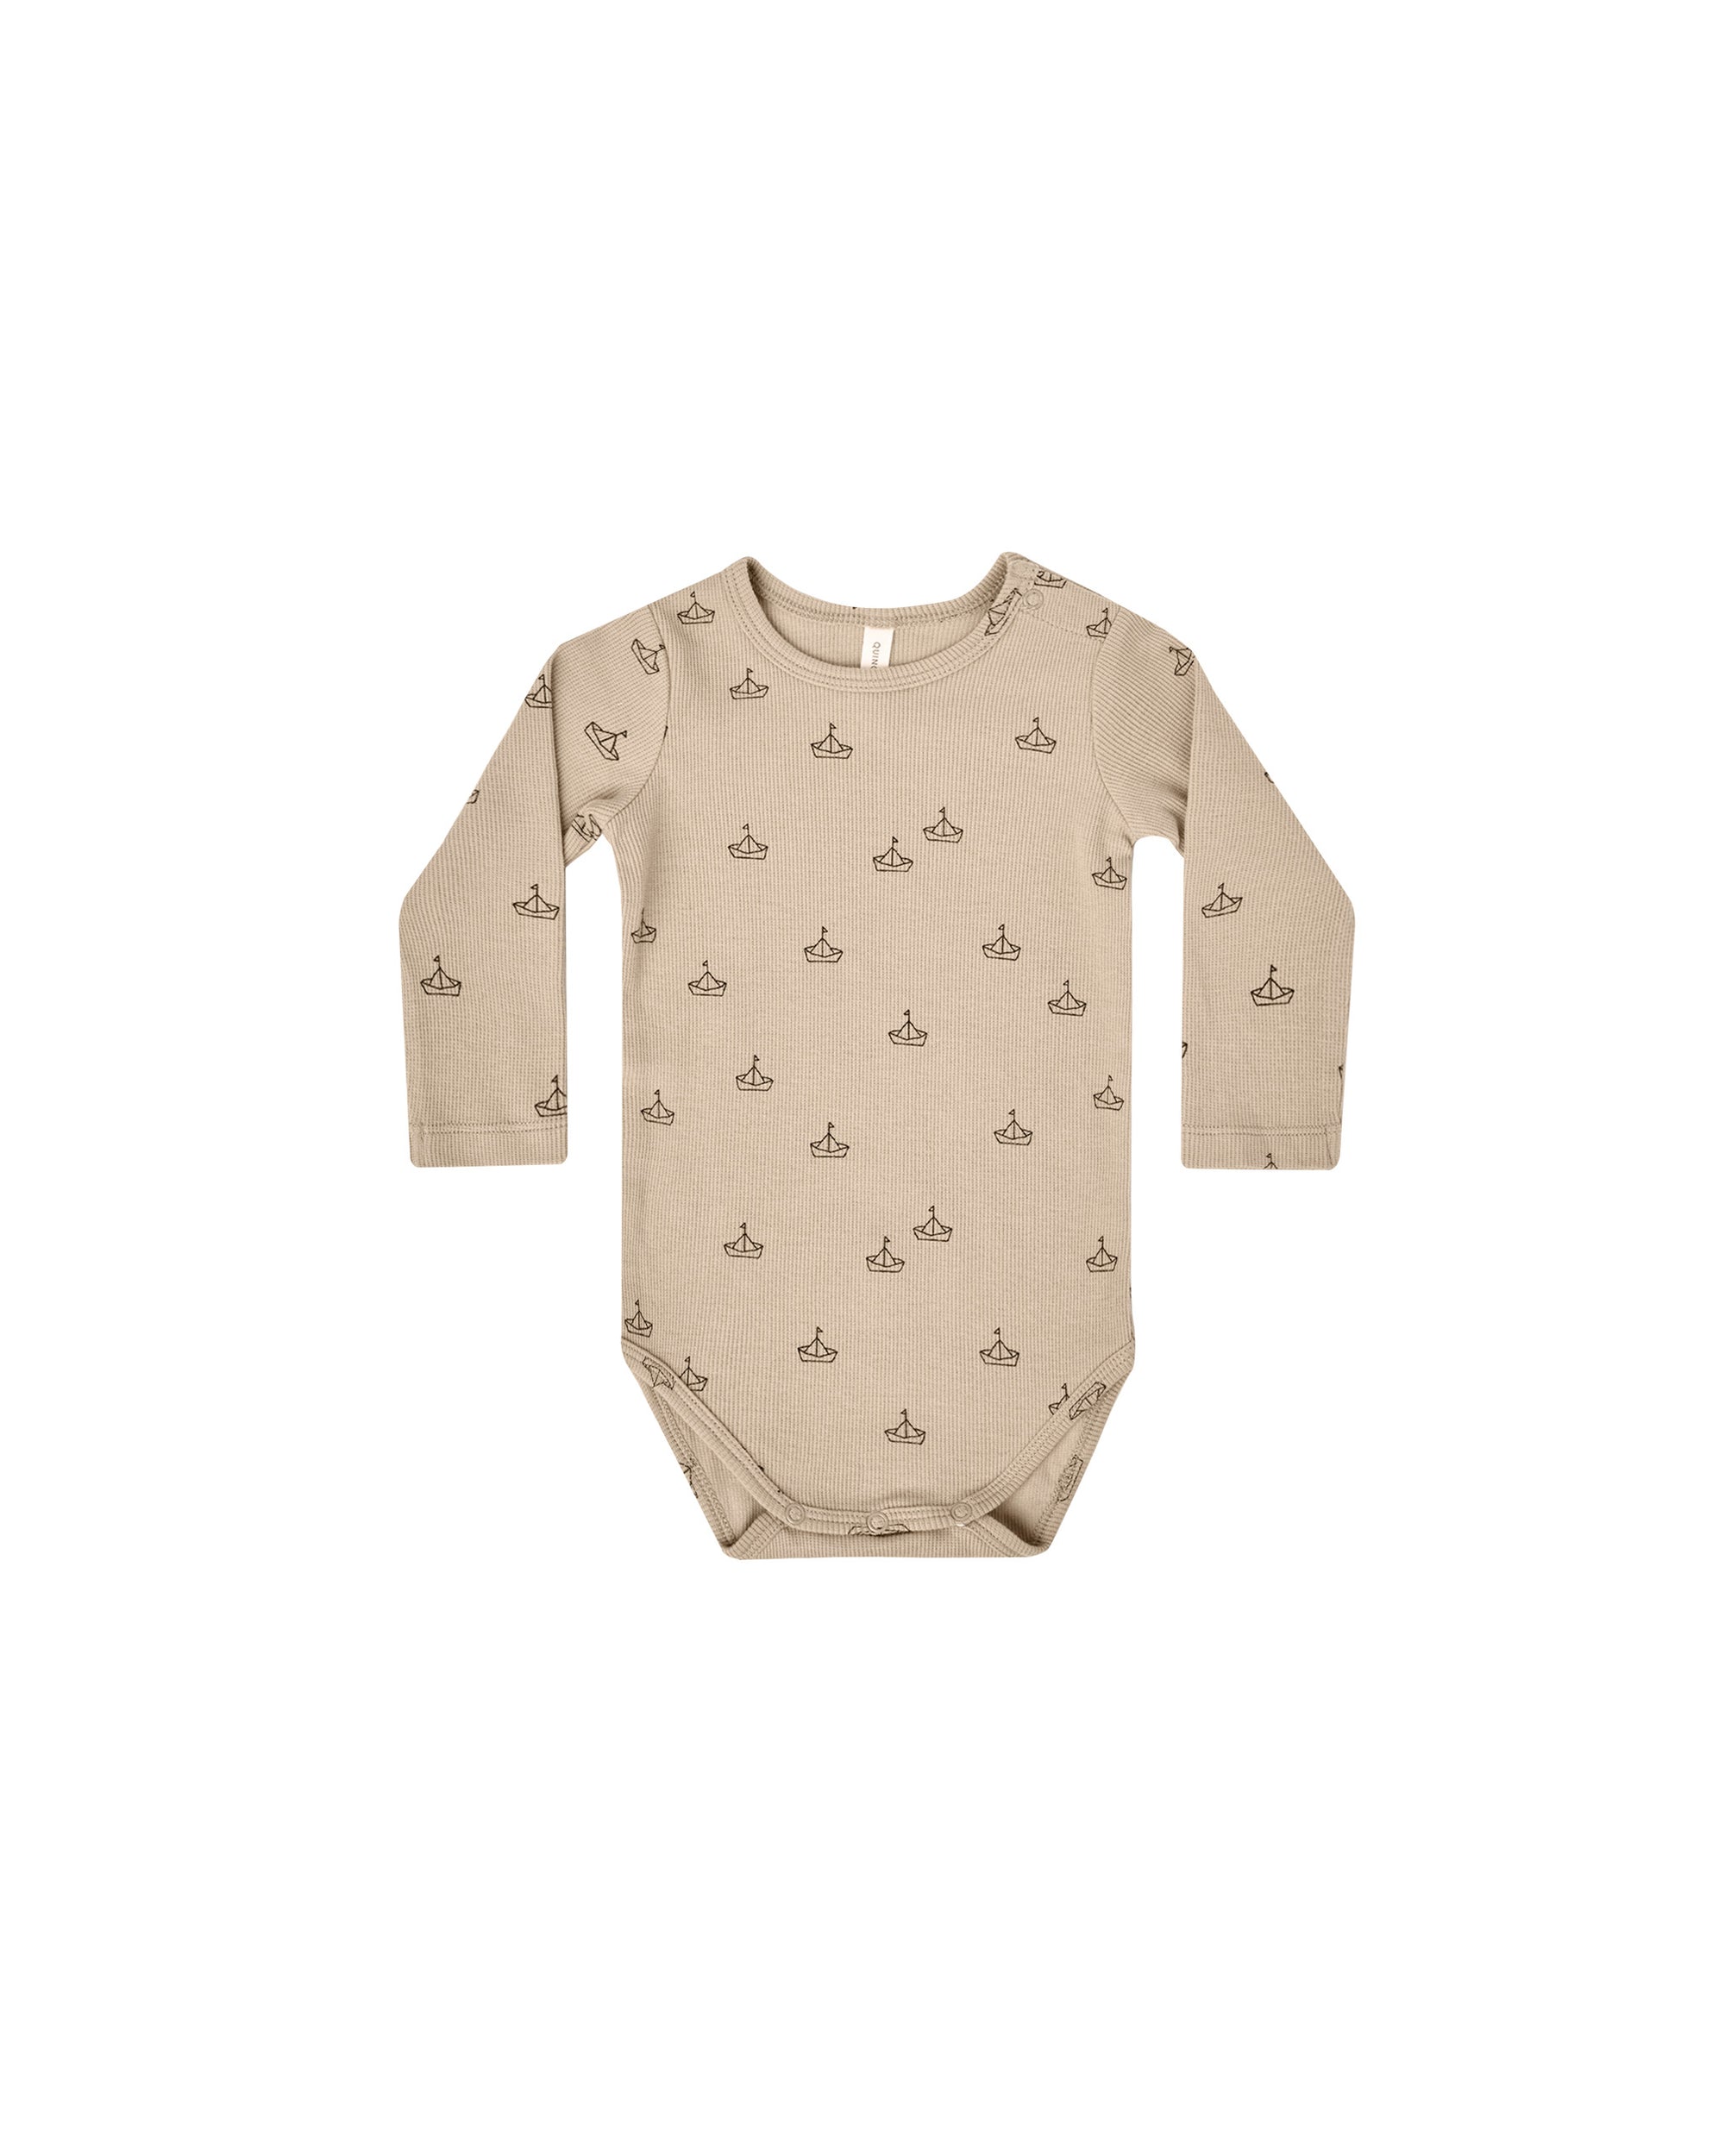 baby ribbed bodysuit in latte color with boat print